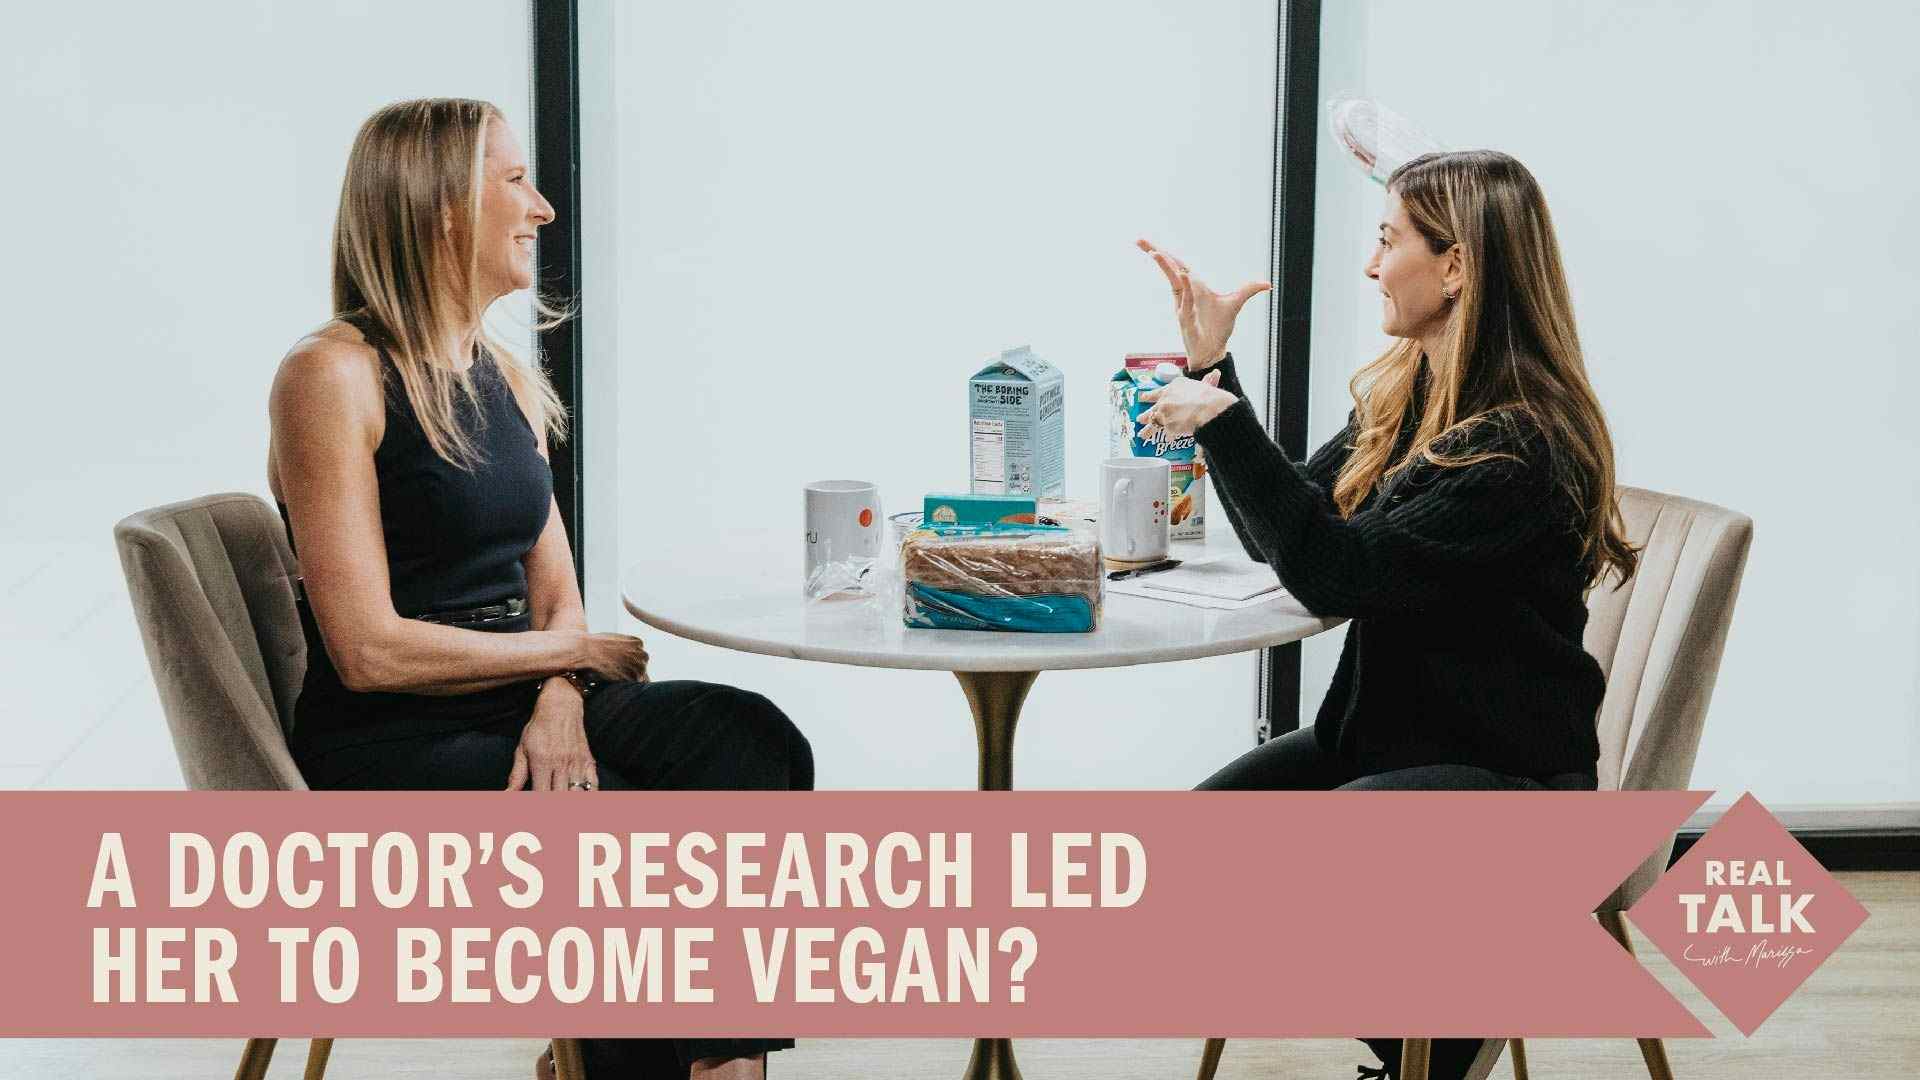 A Doctor’s Research Led Her To Become Vegan